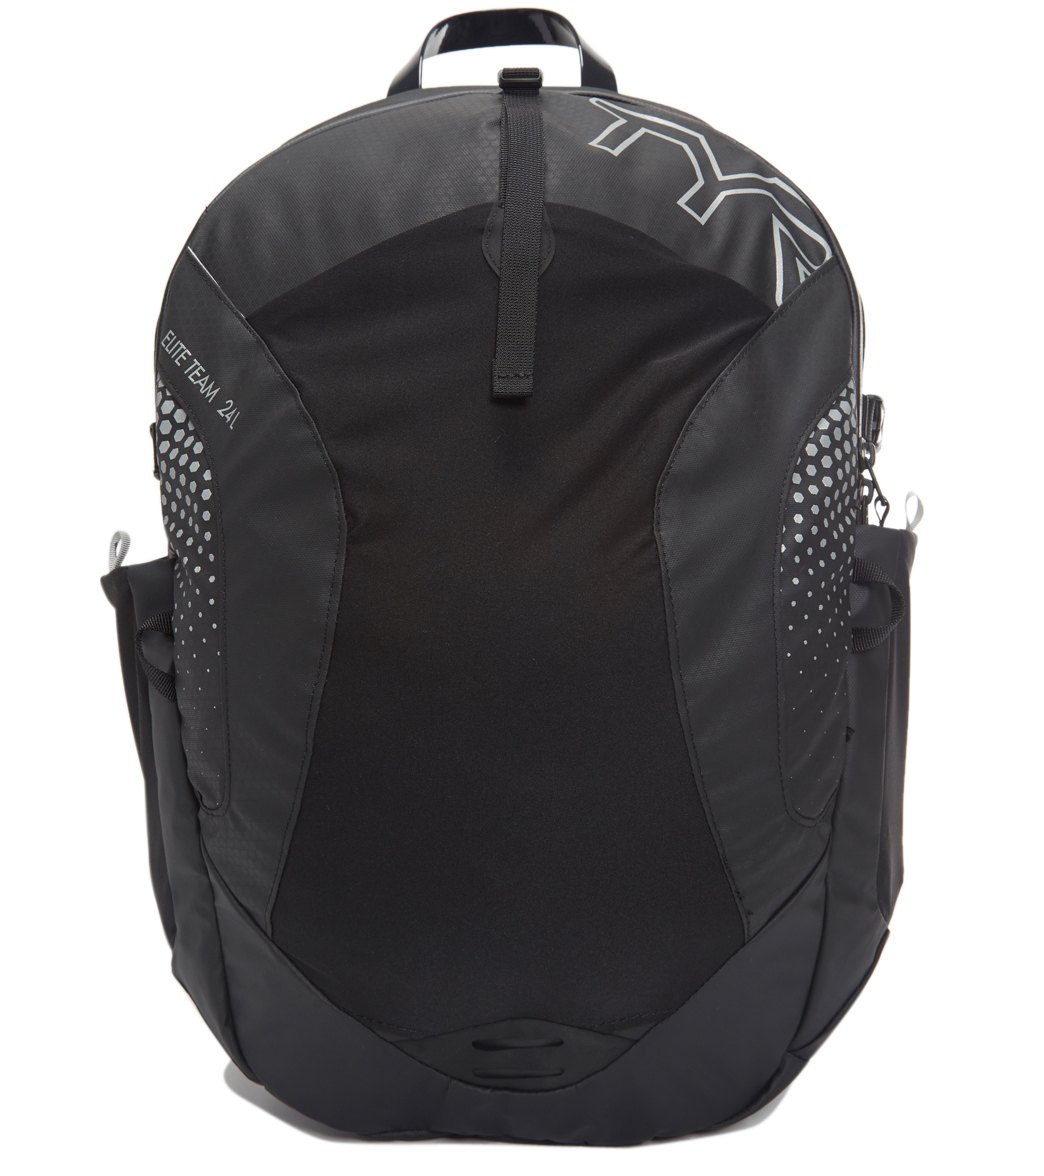 TYR Elite Team Backpack at SwimOutlet.com - Free Shipping